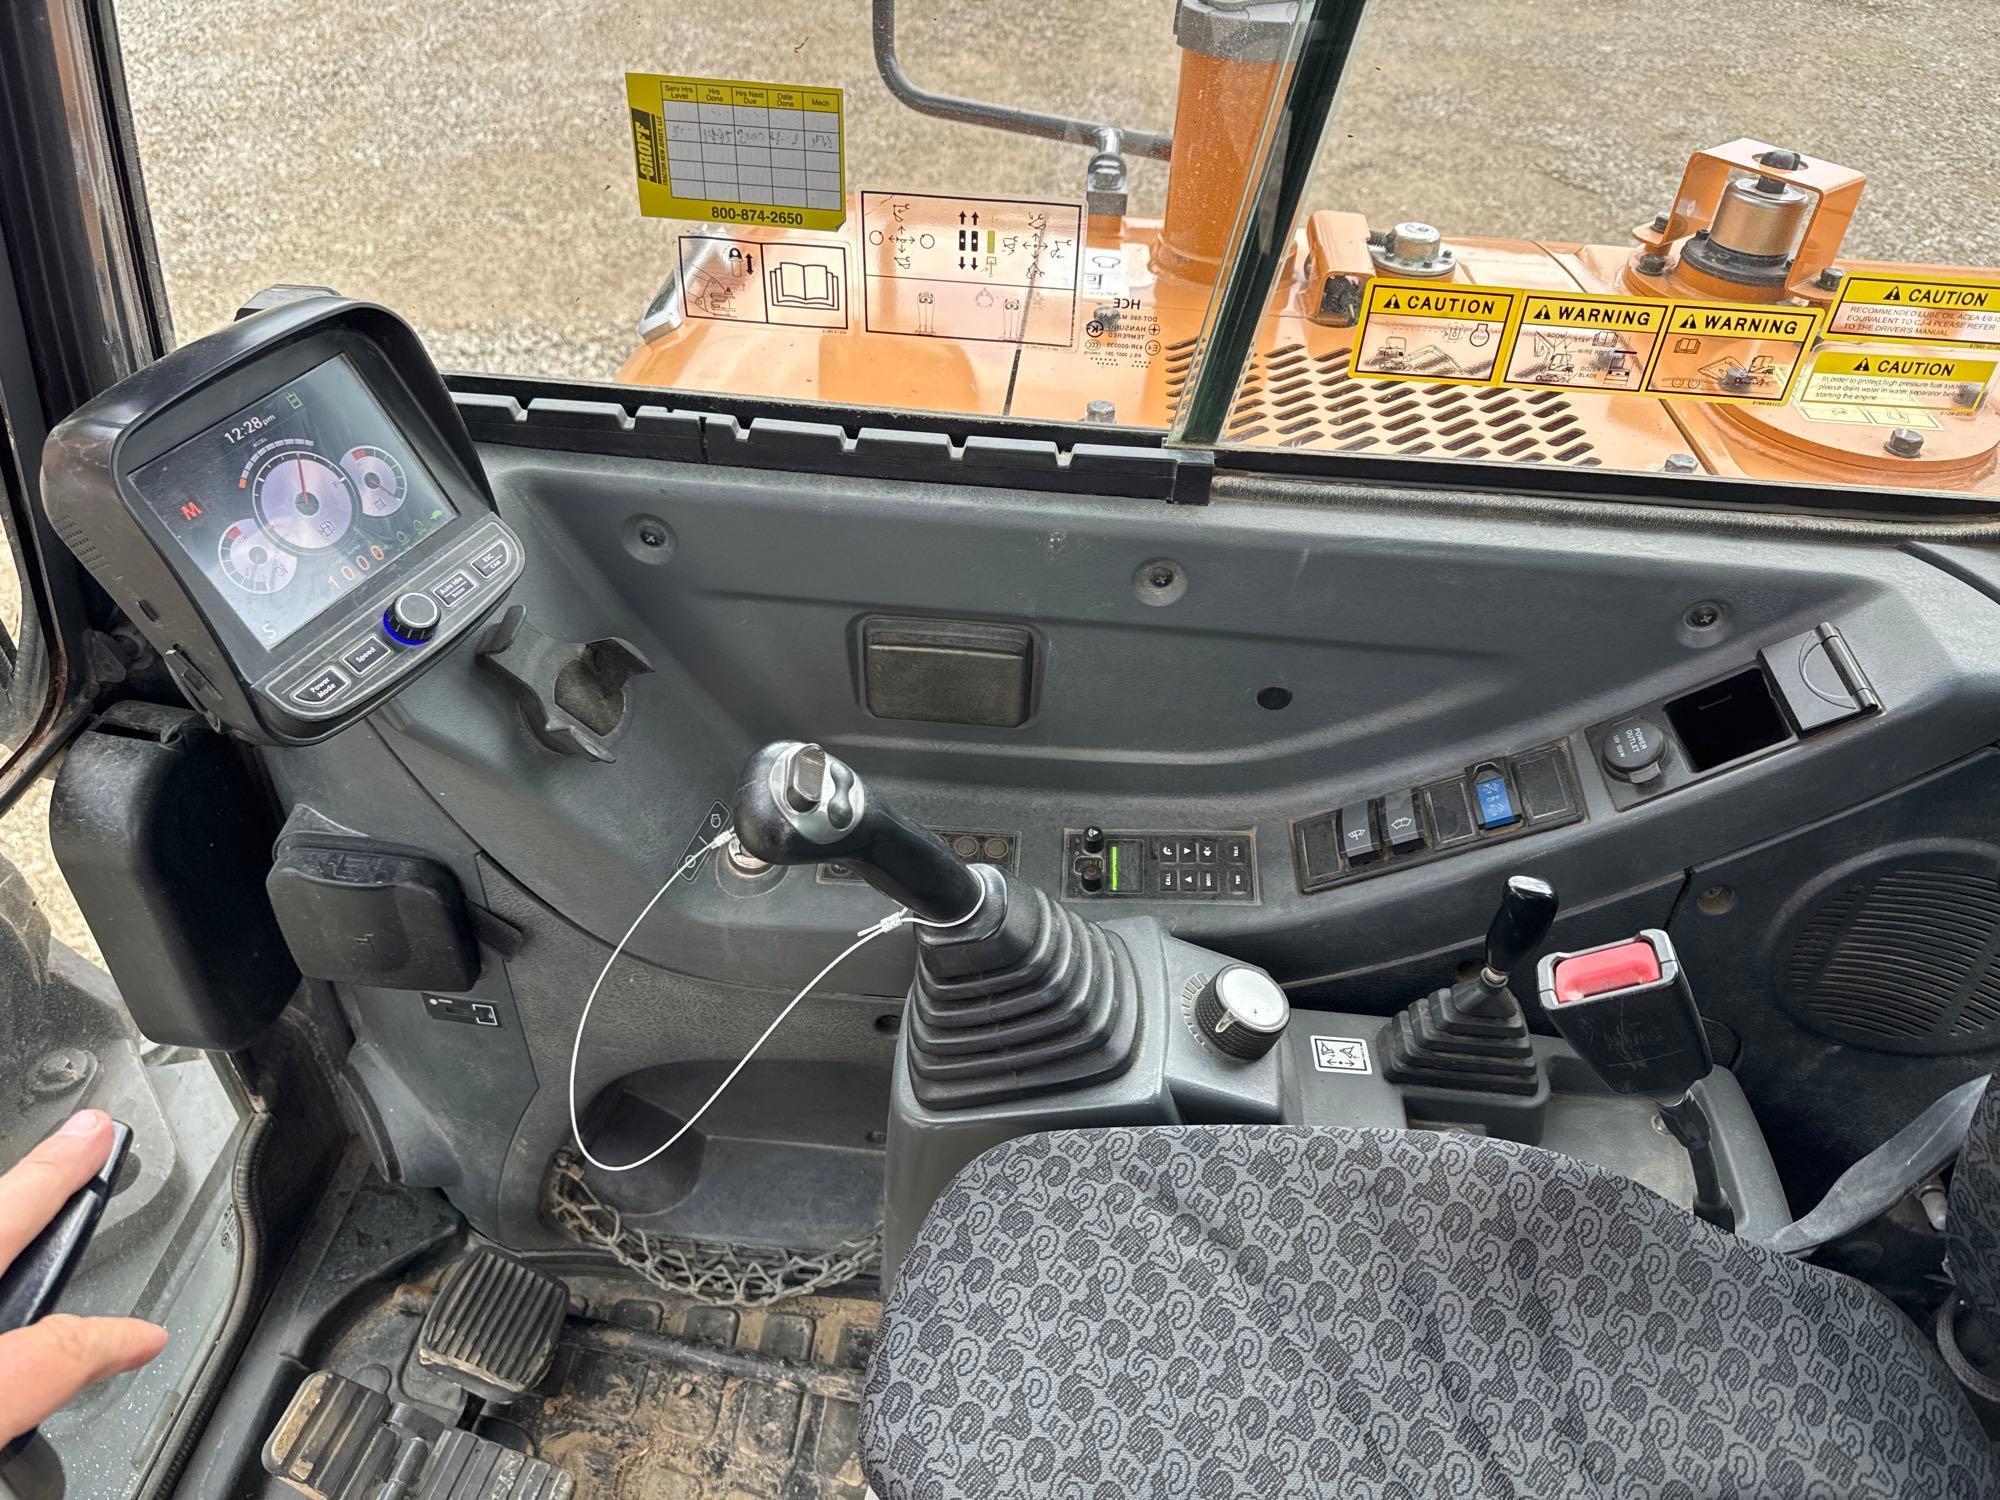 2019 CASE CX57C HYDRAULIC EXCAVATOR SN:HK0000670 powered by diesel engine, equipped with Cab, air,